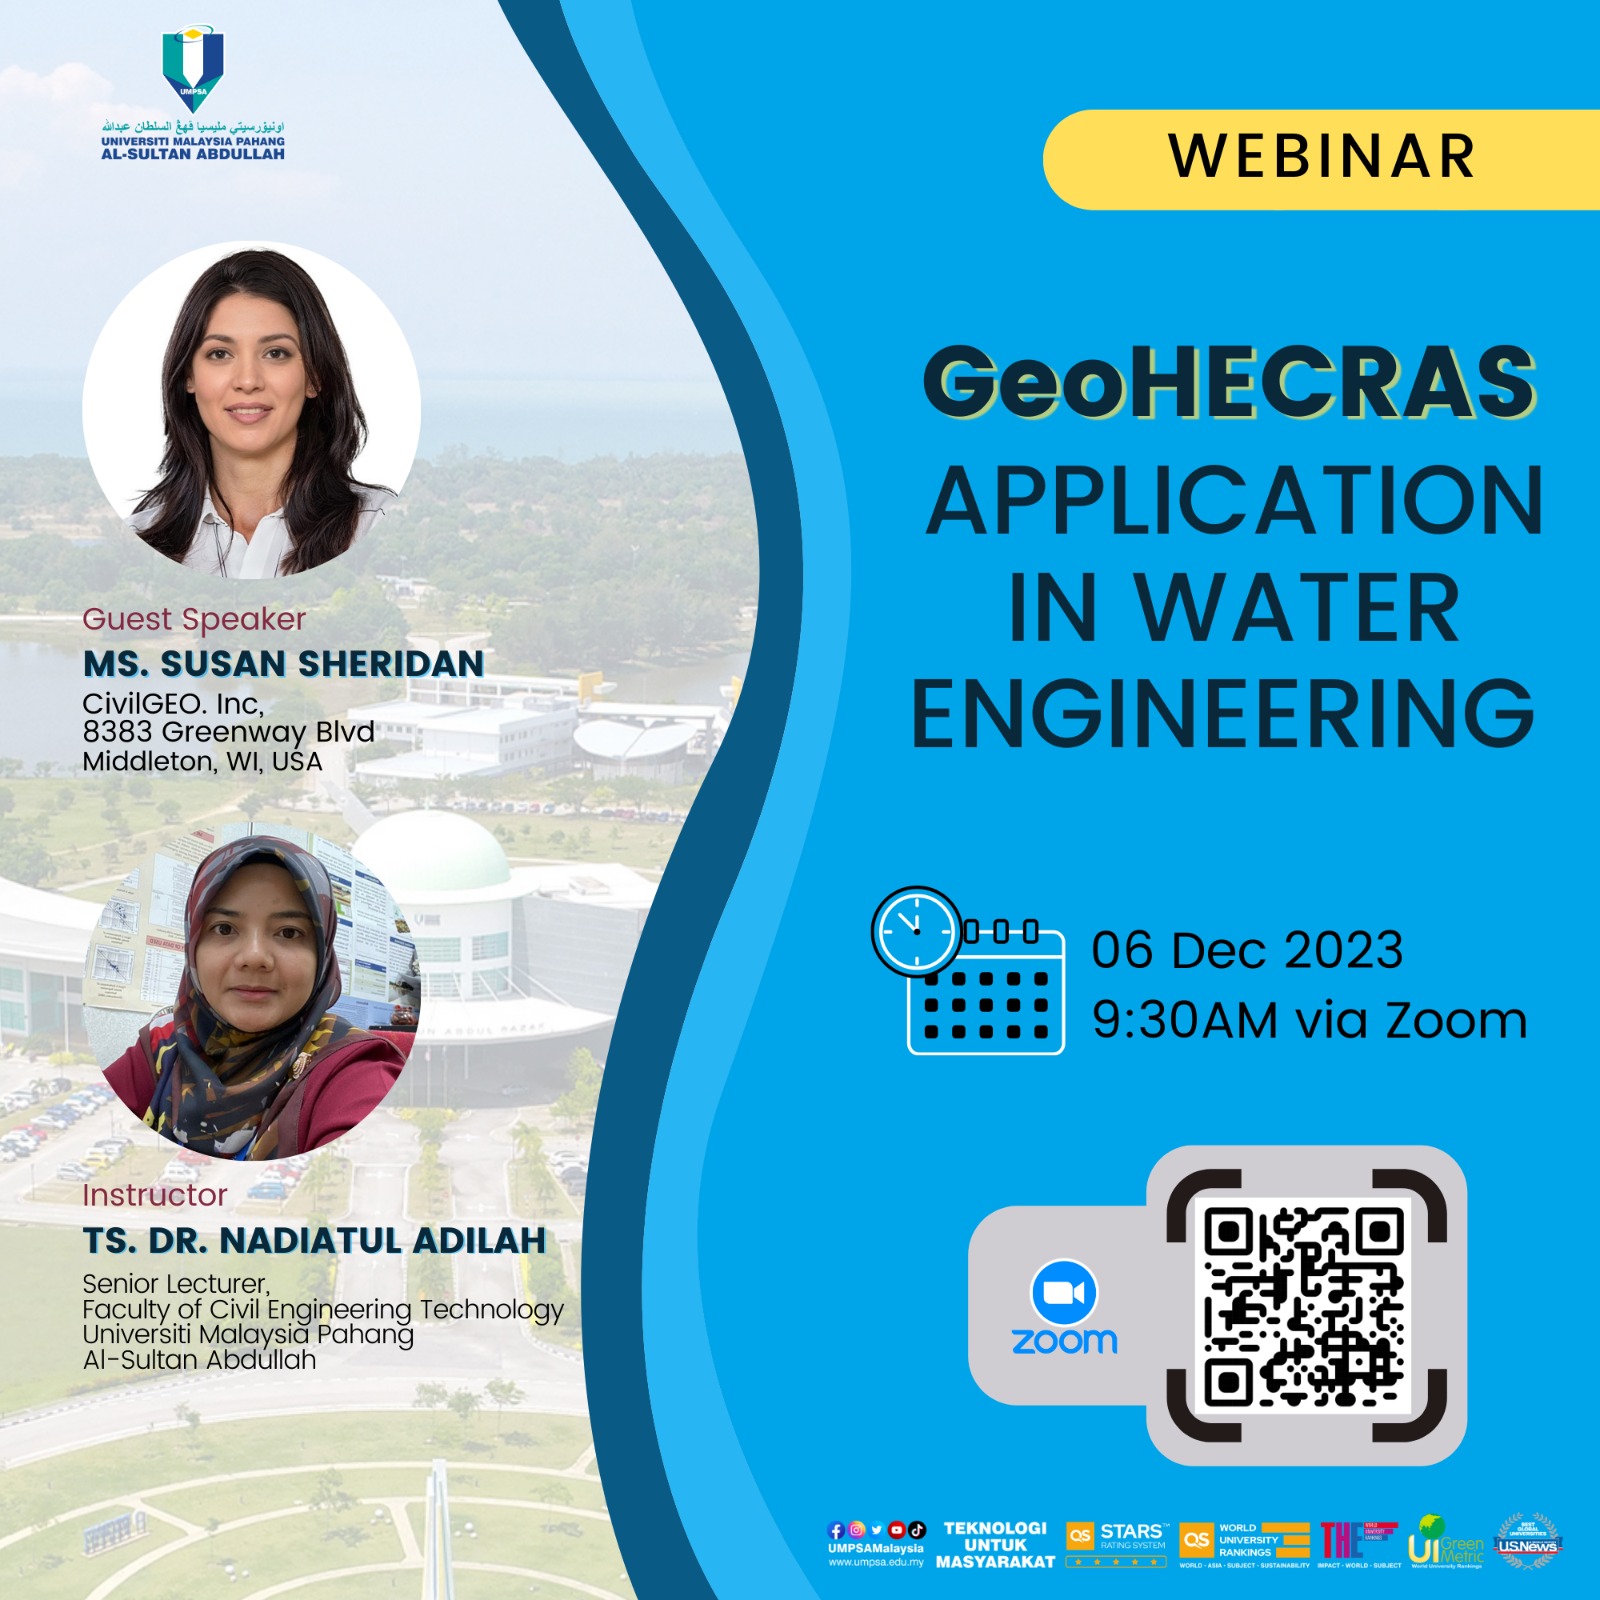 Webinar on GeoHECRAS Application in Water Engineering on 6th December 2023 via Zoom conducted by Ts. Dr. Nadiatul Adilah Ahmad Abdul Ghani, Senior Lecturer, Faculty of Civil Engineering & Technology UMPSA